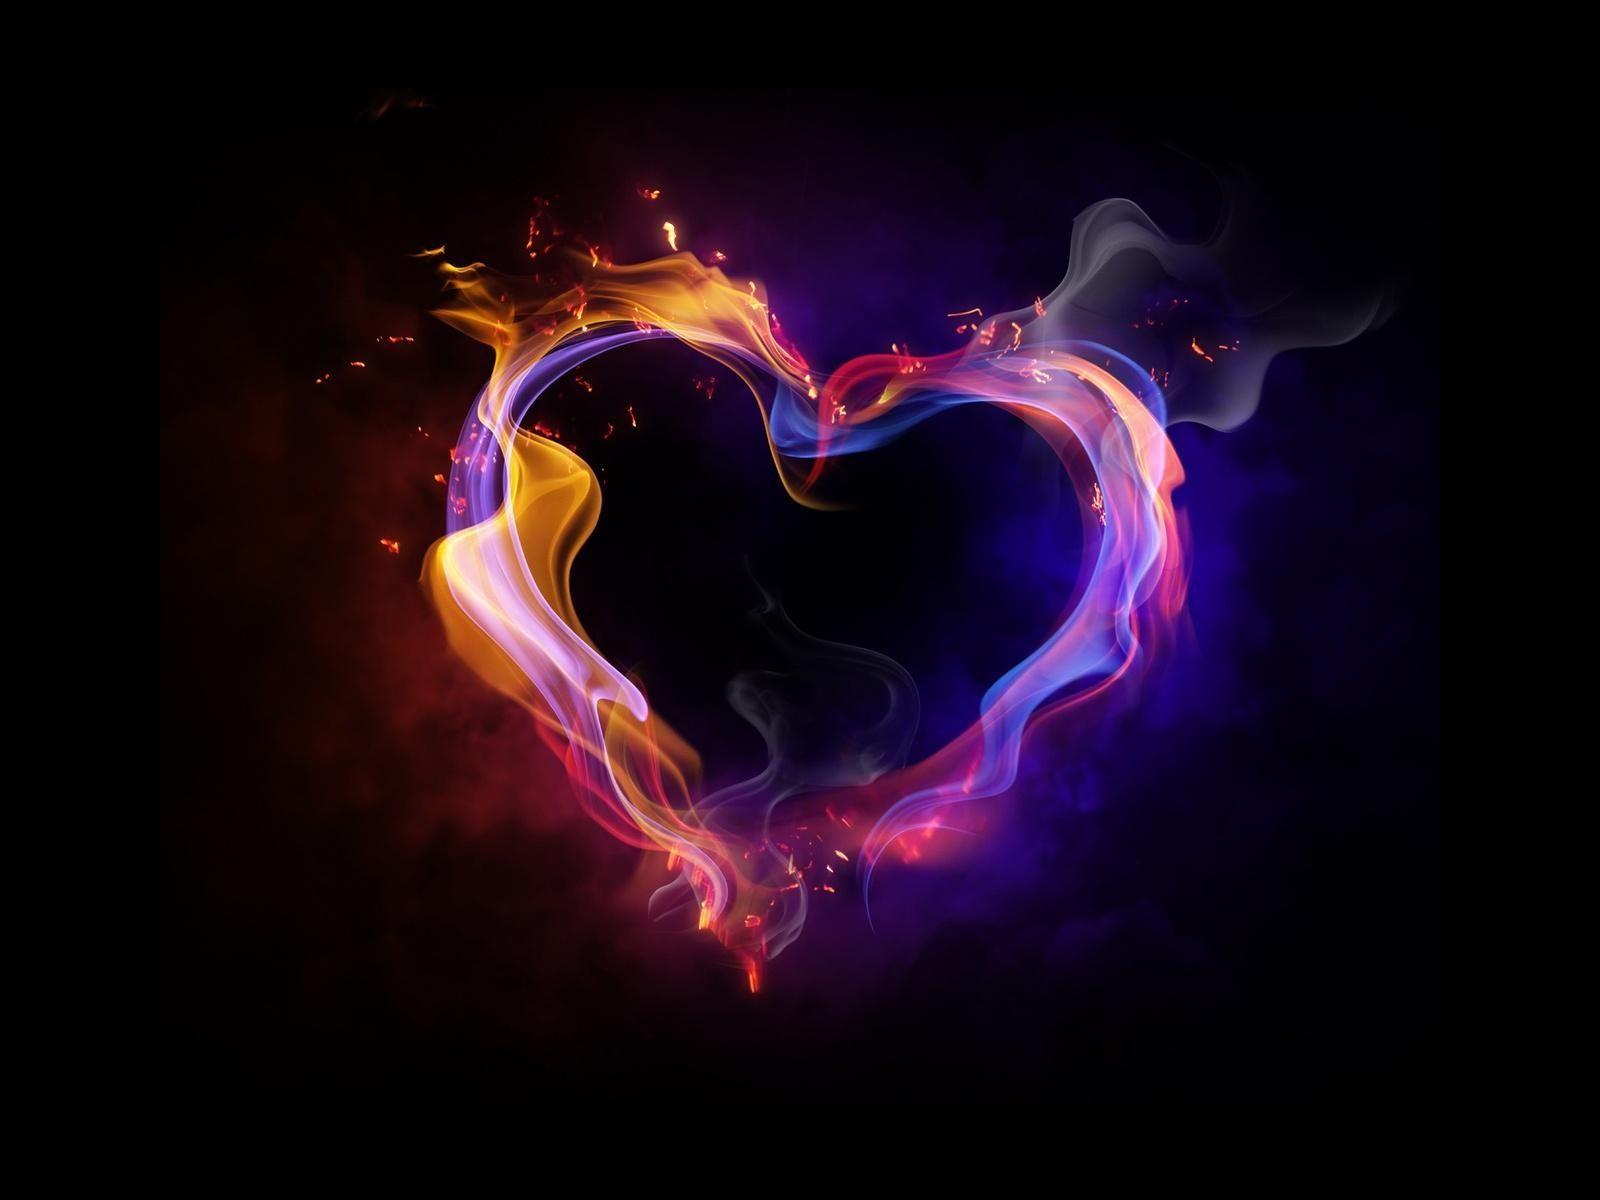 I Love You Heart Image And Desktop Wallpaper Love Picture